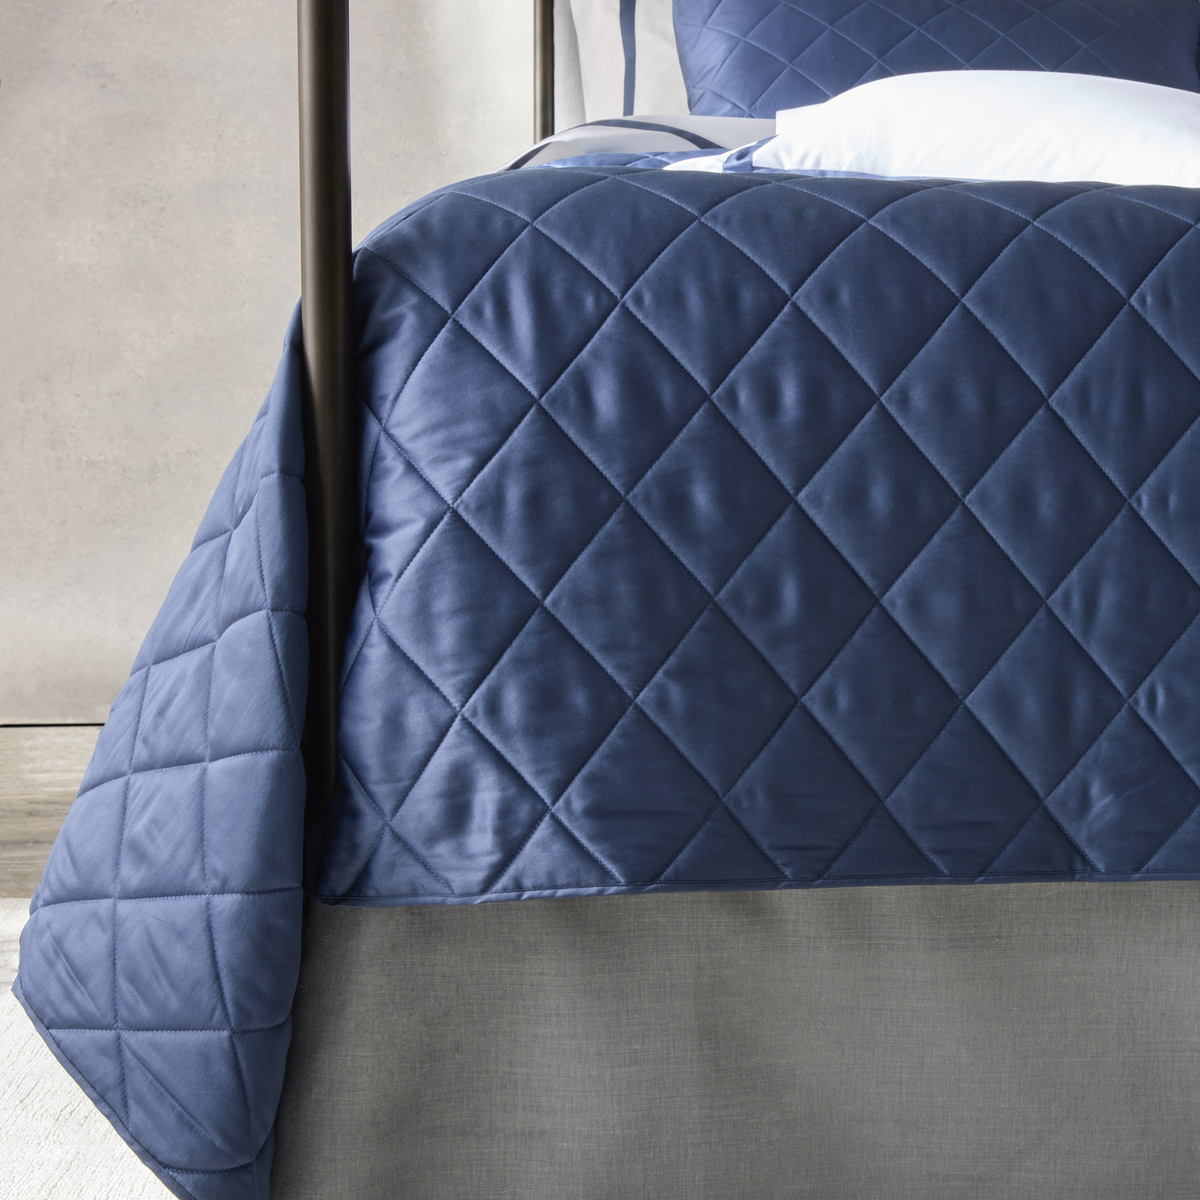 Closeup Shot of Matouk Nocturne Quilted Bedding at the Front of Bed